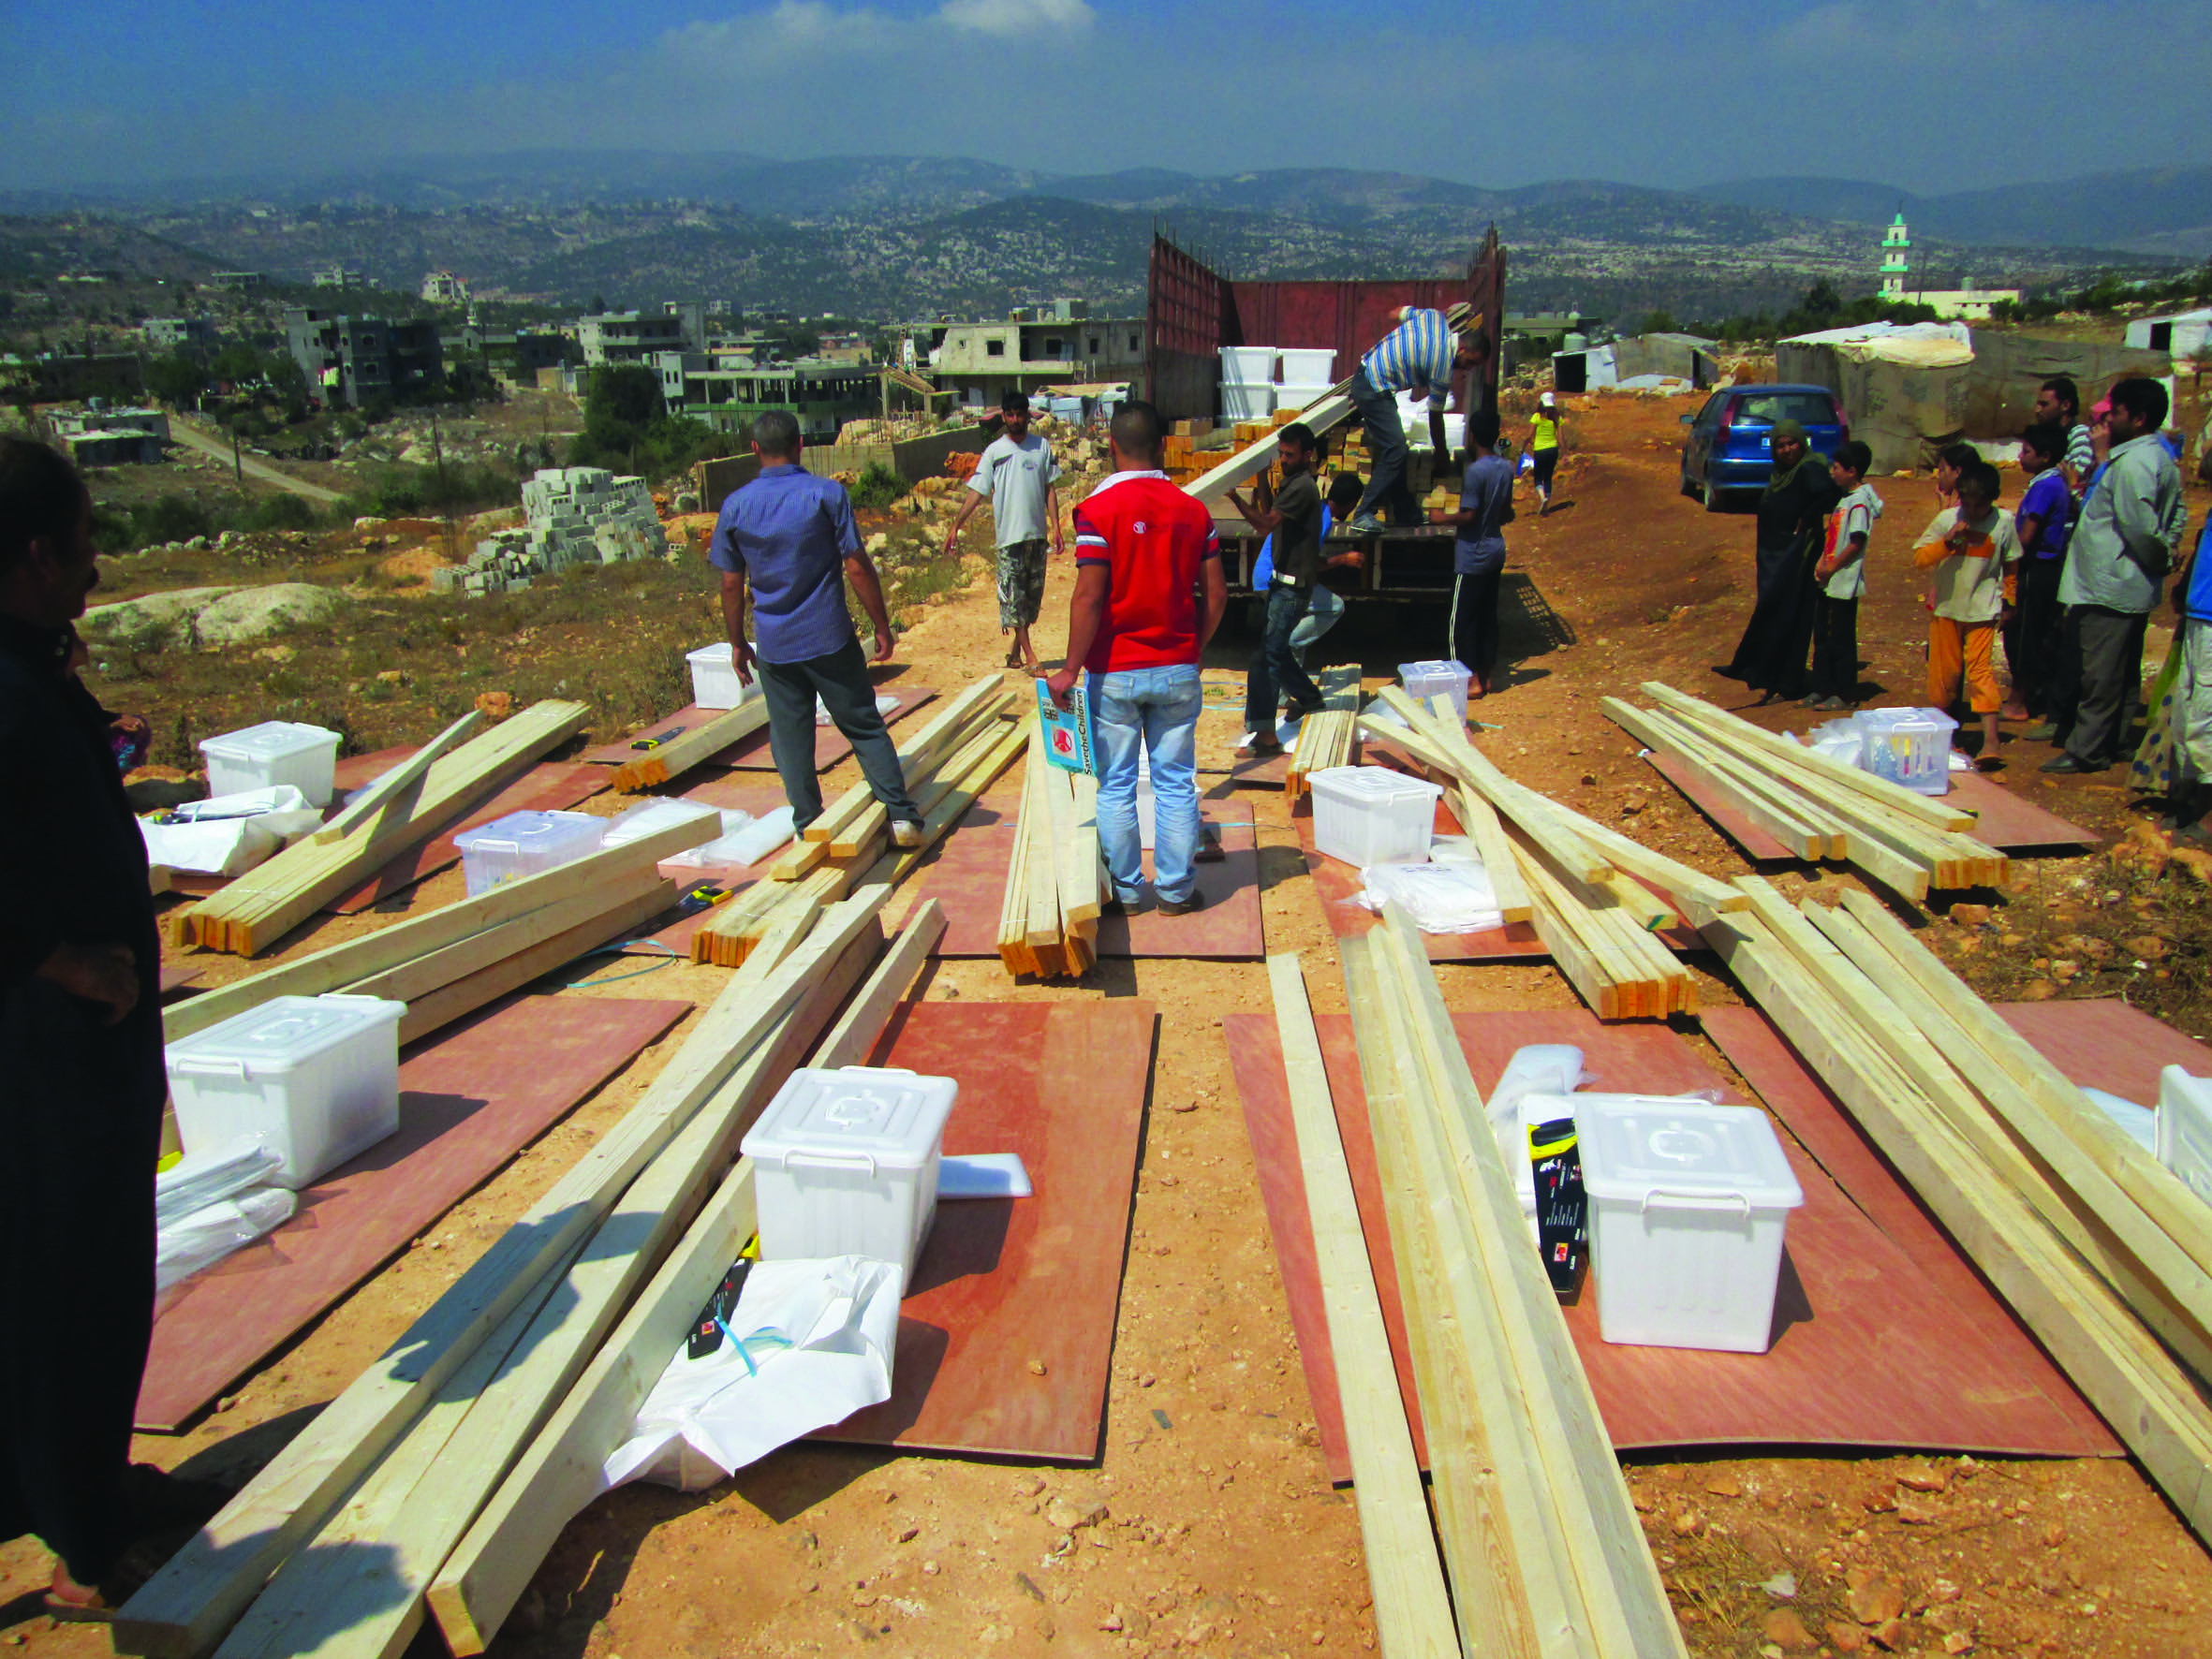 Shelter kits being distributed to an Informal Settlement in Akkar District, North Lebanon